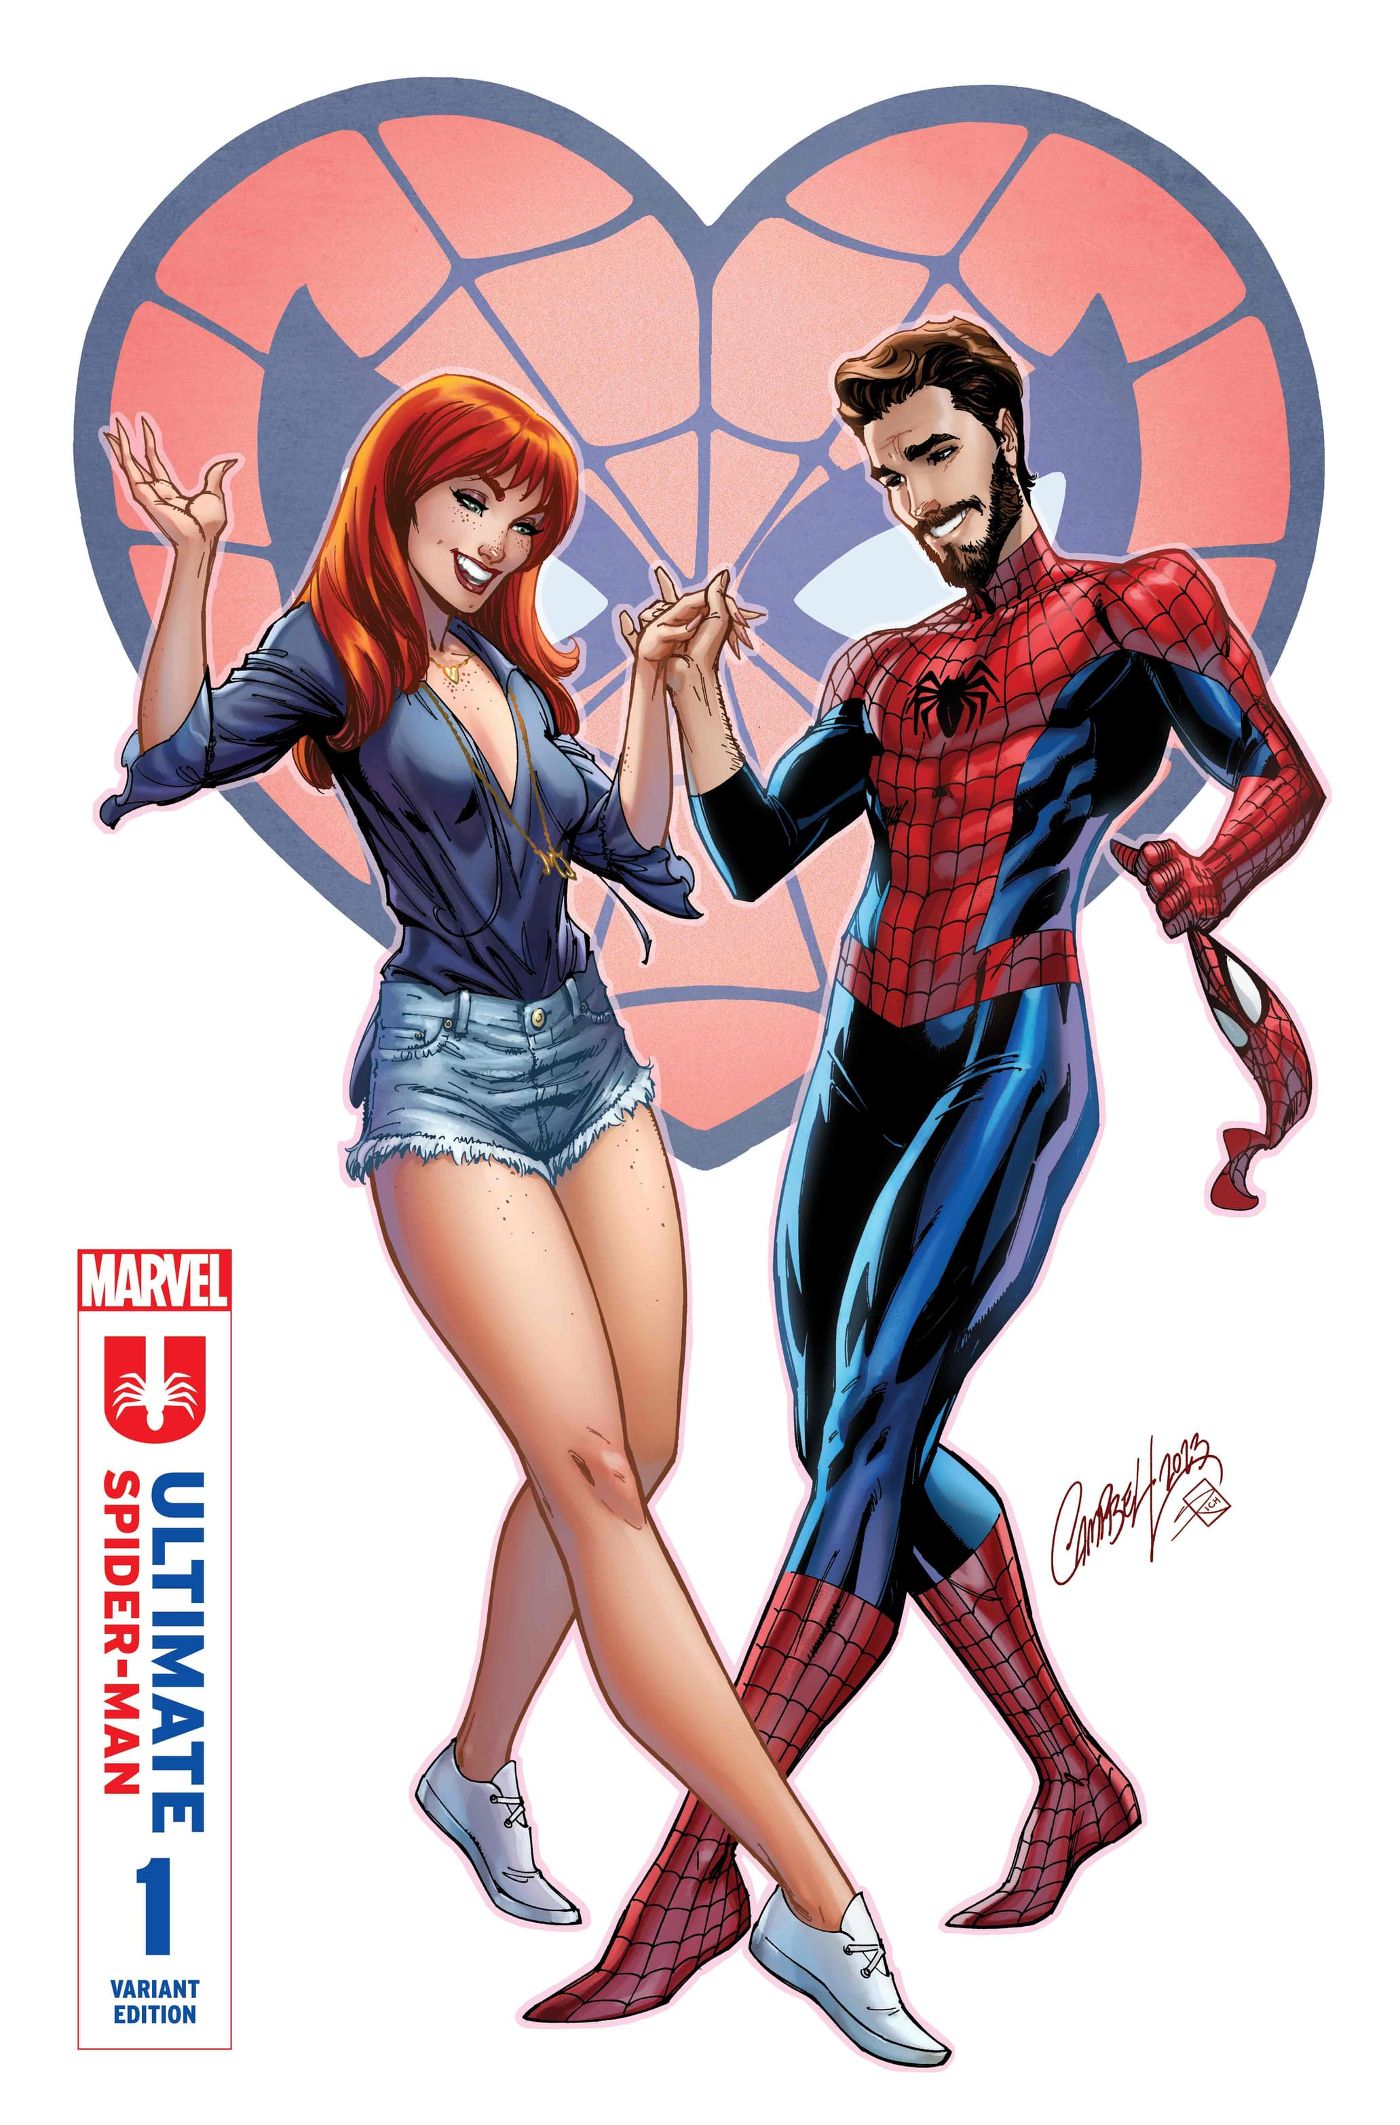 “A New Spidey for a New Generation”: Why Marvel’s New Peter Parker Is Married with Kids